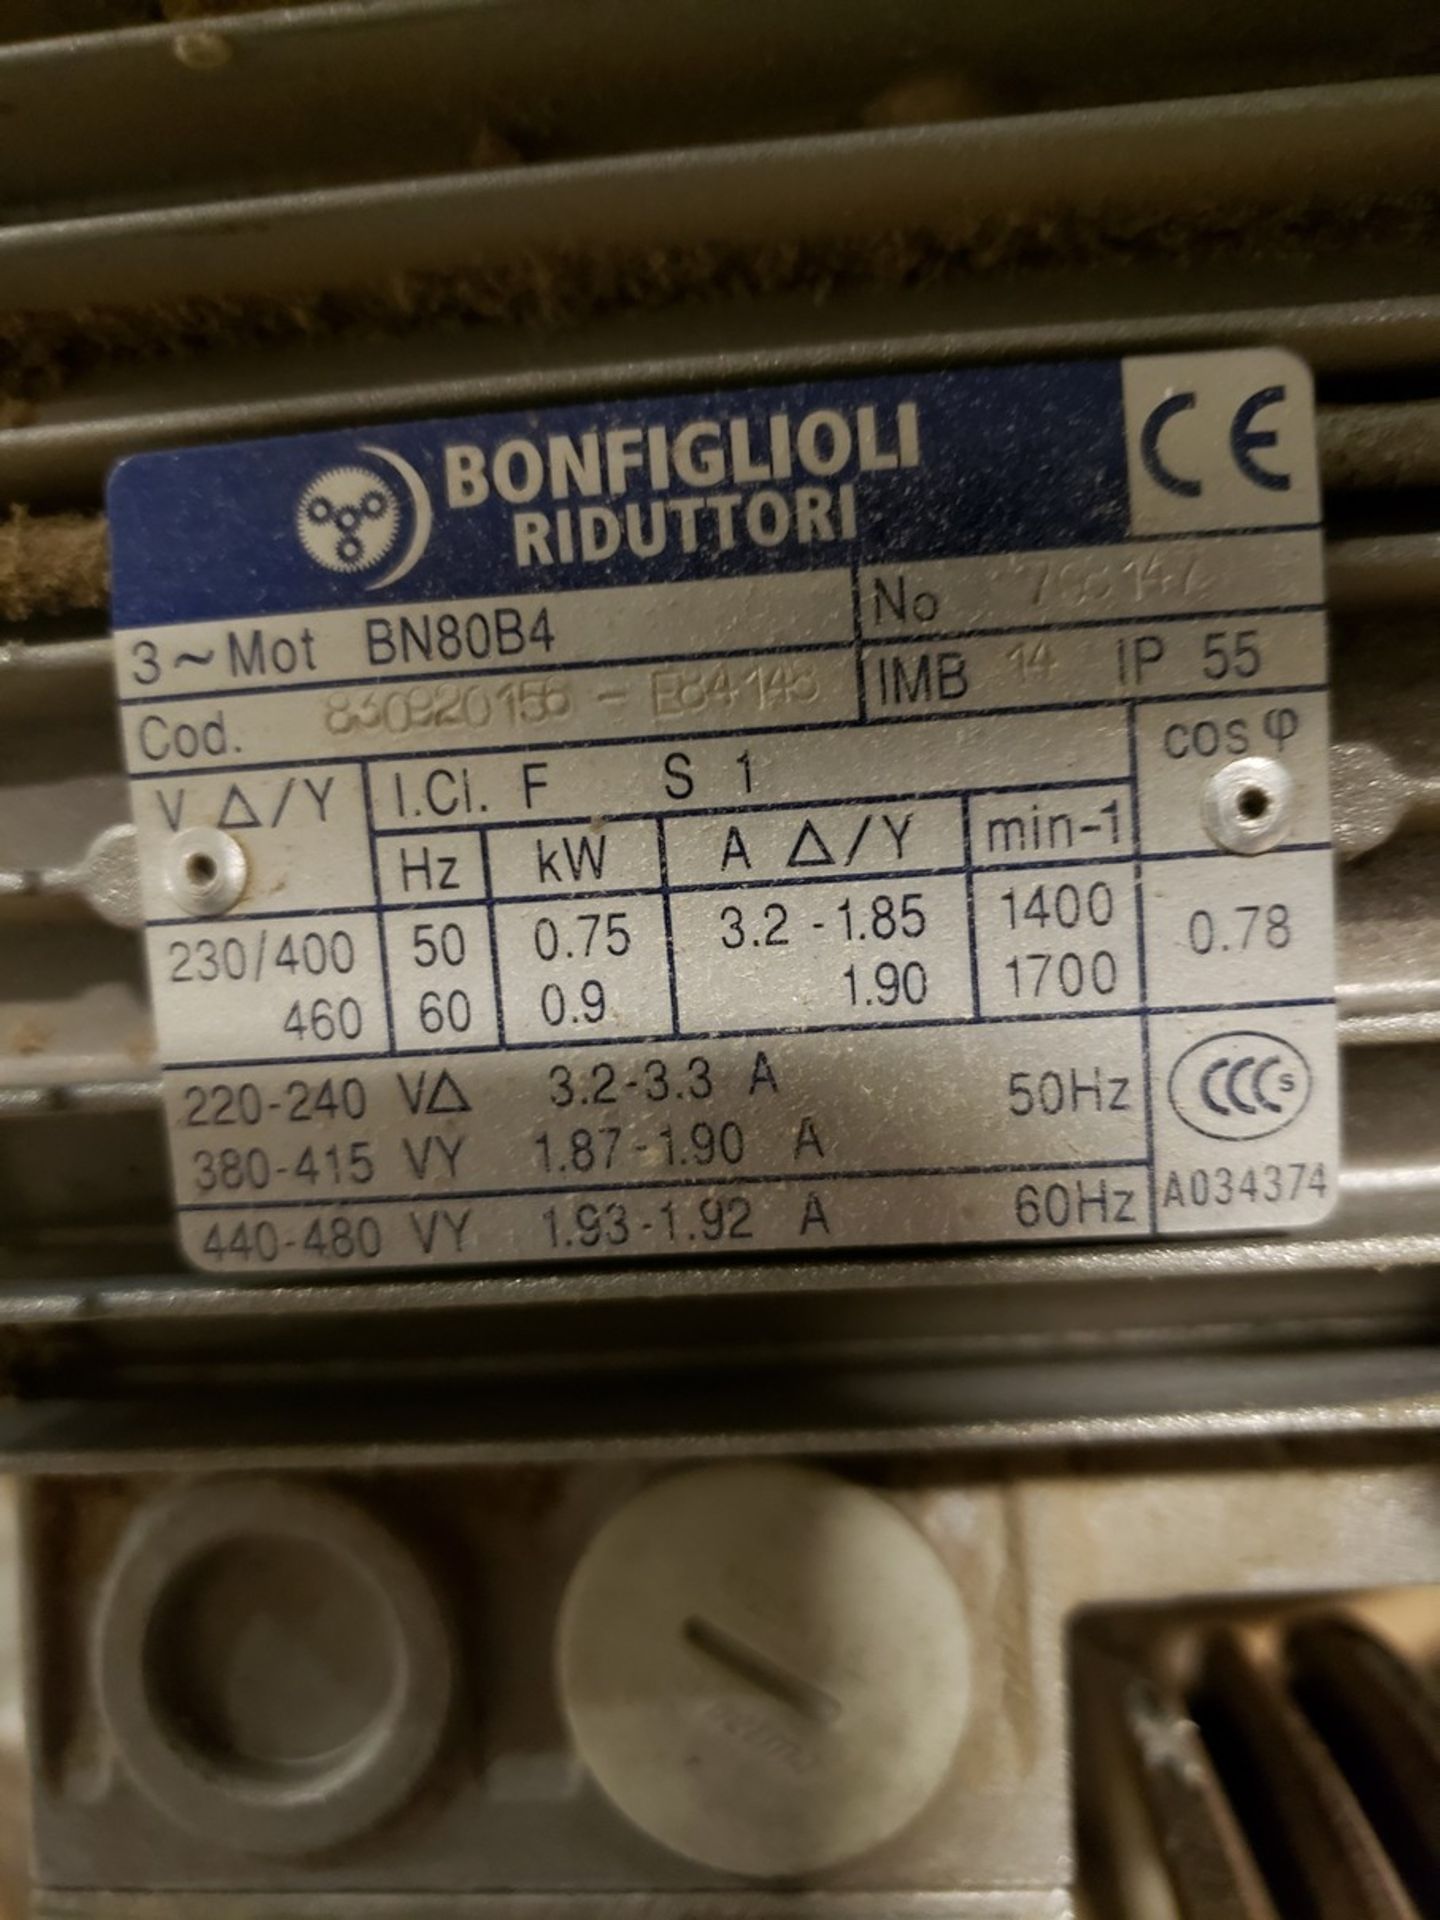 PALLET OF MOTORS, 1 MARATHON , UNKNOWN HP, OR CONDITION WITH STERNS BREAK ATTACHED, 1 BONFIGLIOLI - Image 8 of 13